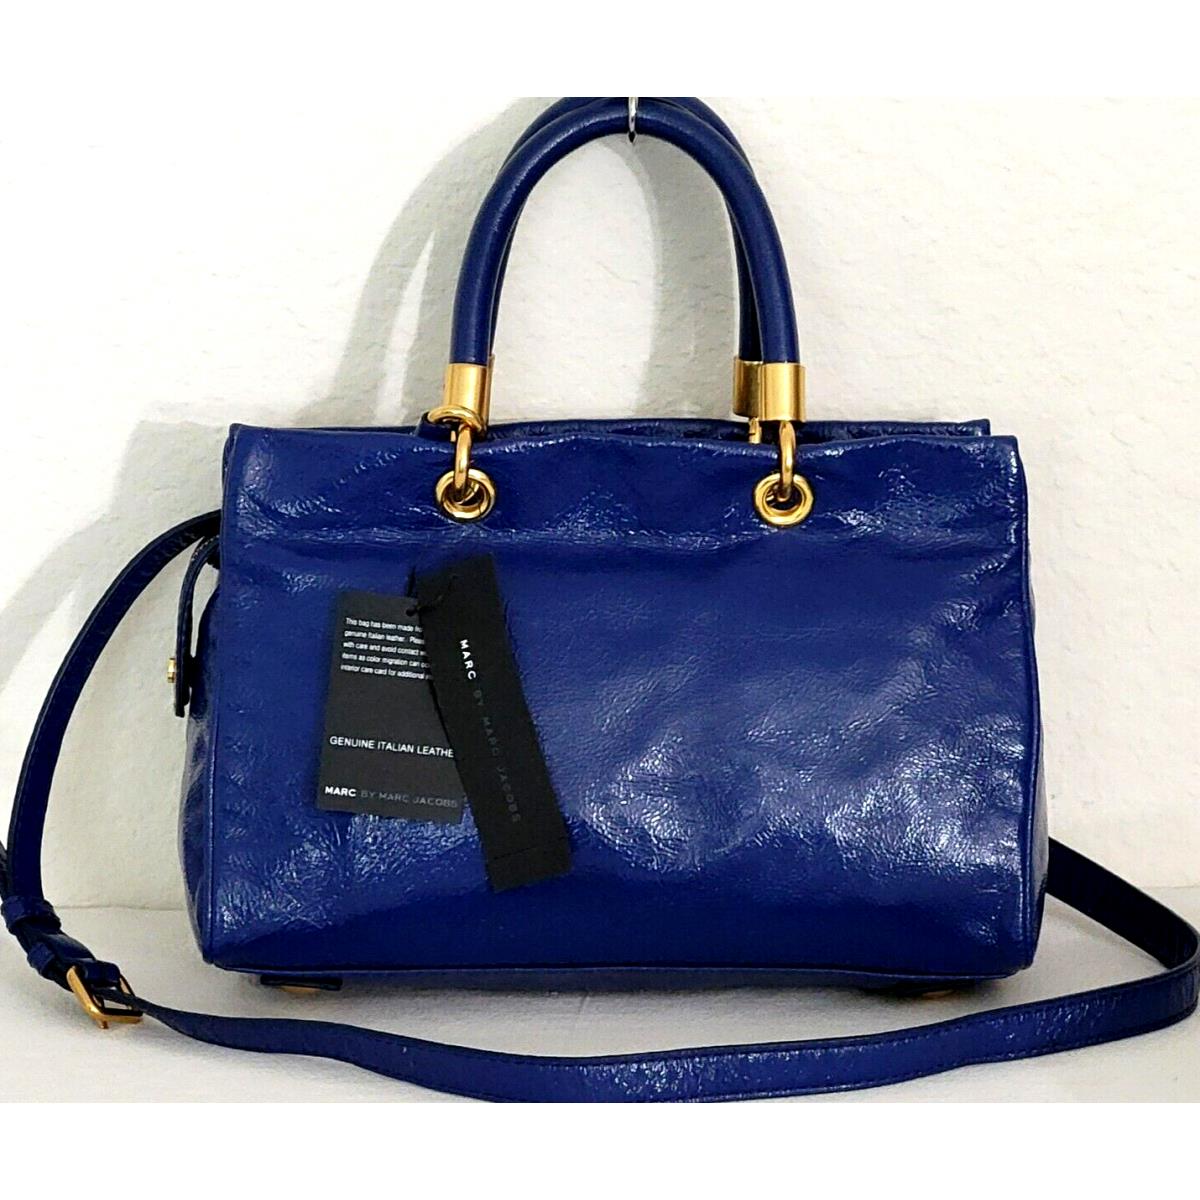 Marc Jacobs  bag  TOO HOT HANDLE - Blue Handle/Strap, Gold Hardware, BRIGHT ROYAL BLUE Exterior 6